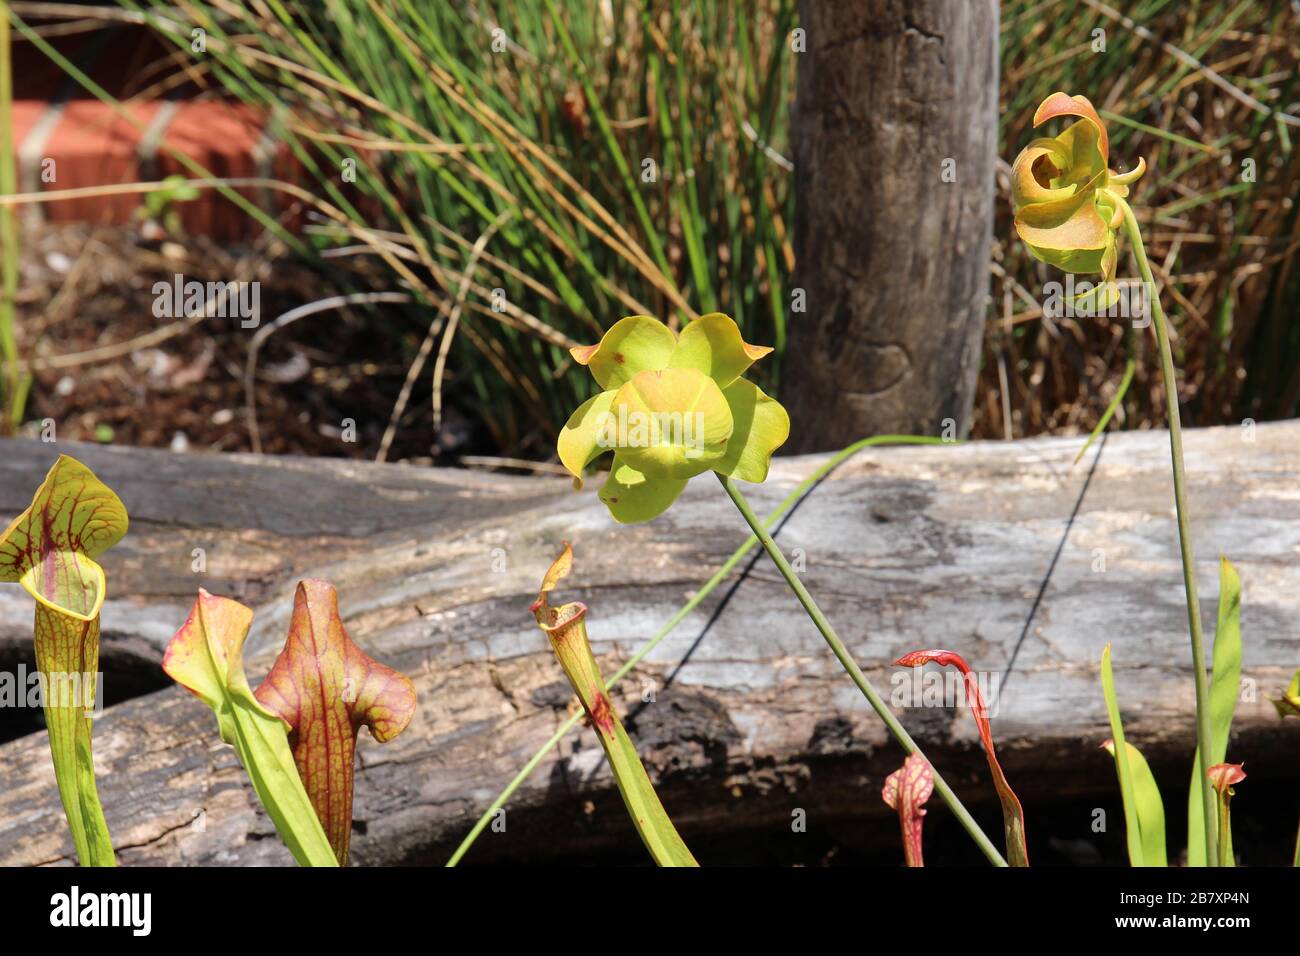 Yellow Pitcher Plants in an outdoor garden Stock Photo